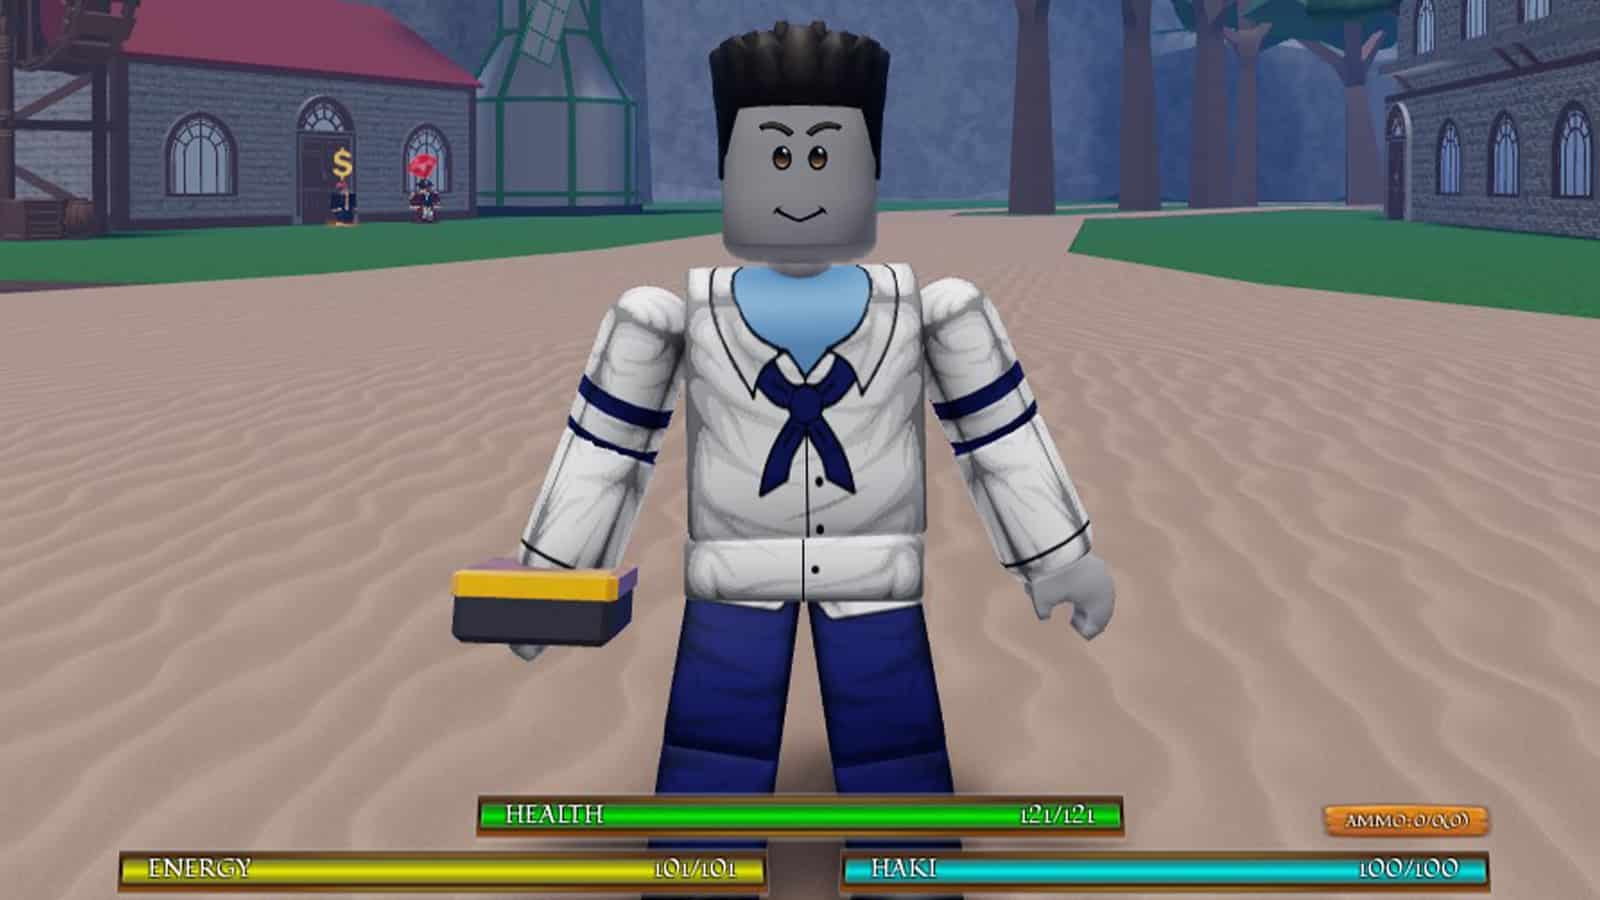 A marine character from True Piece Roblox where players can use codes to unlock free gems.